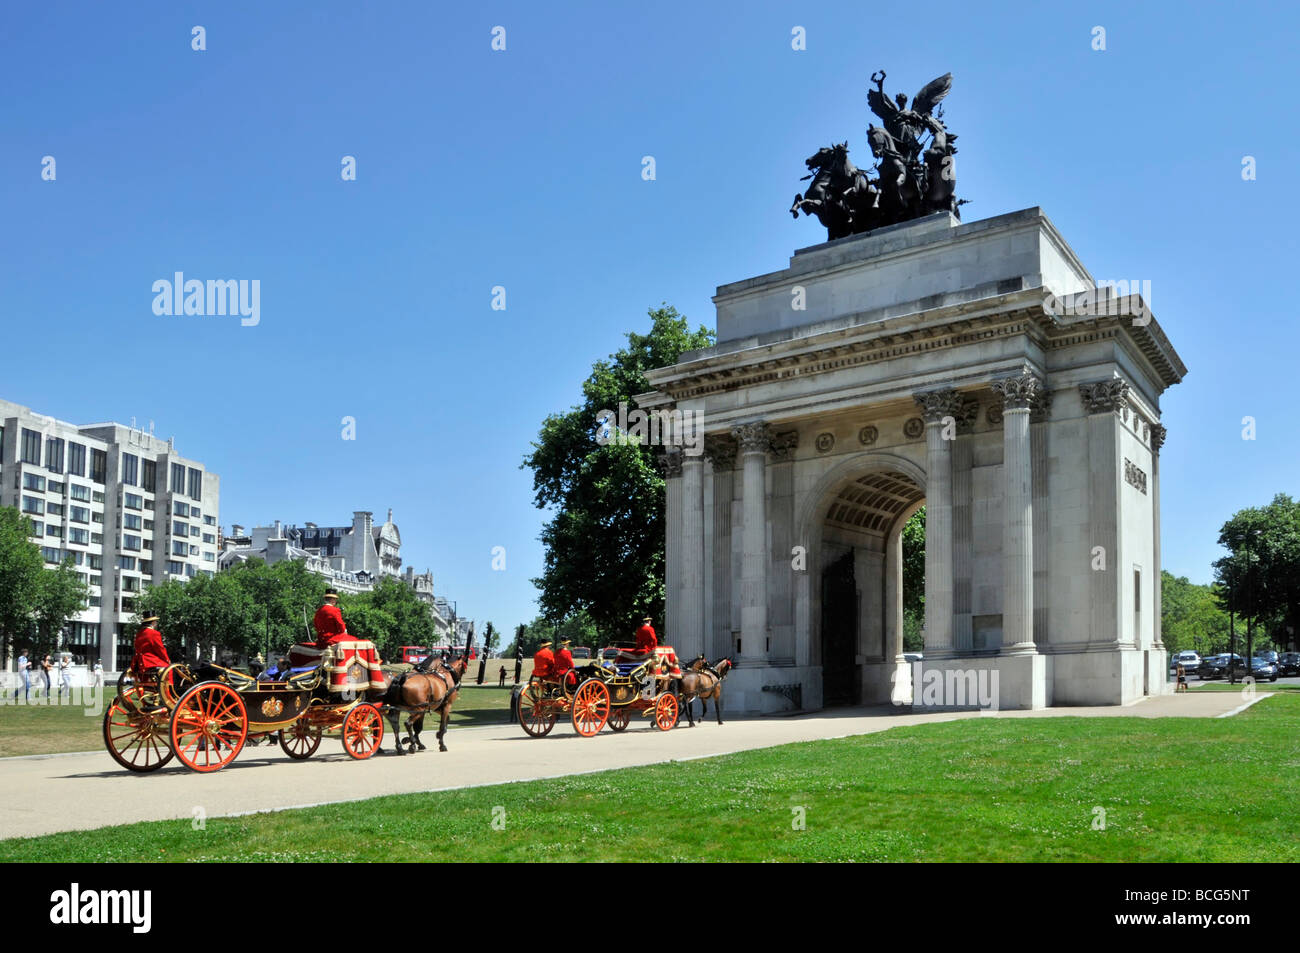 Two horse drawn open carriages about to pass through Wellington Arch Hyde Park Corner London England UK Stock Photo